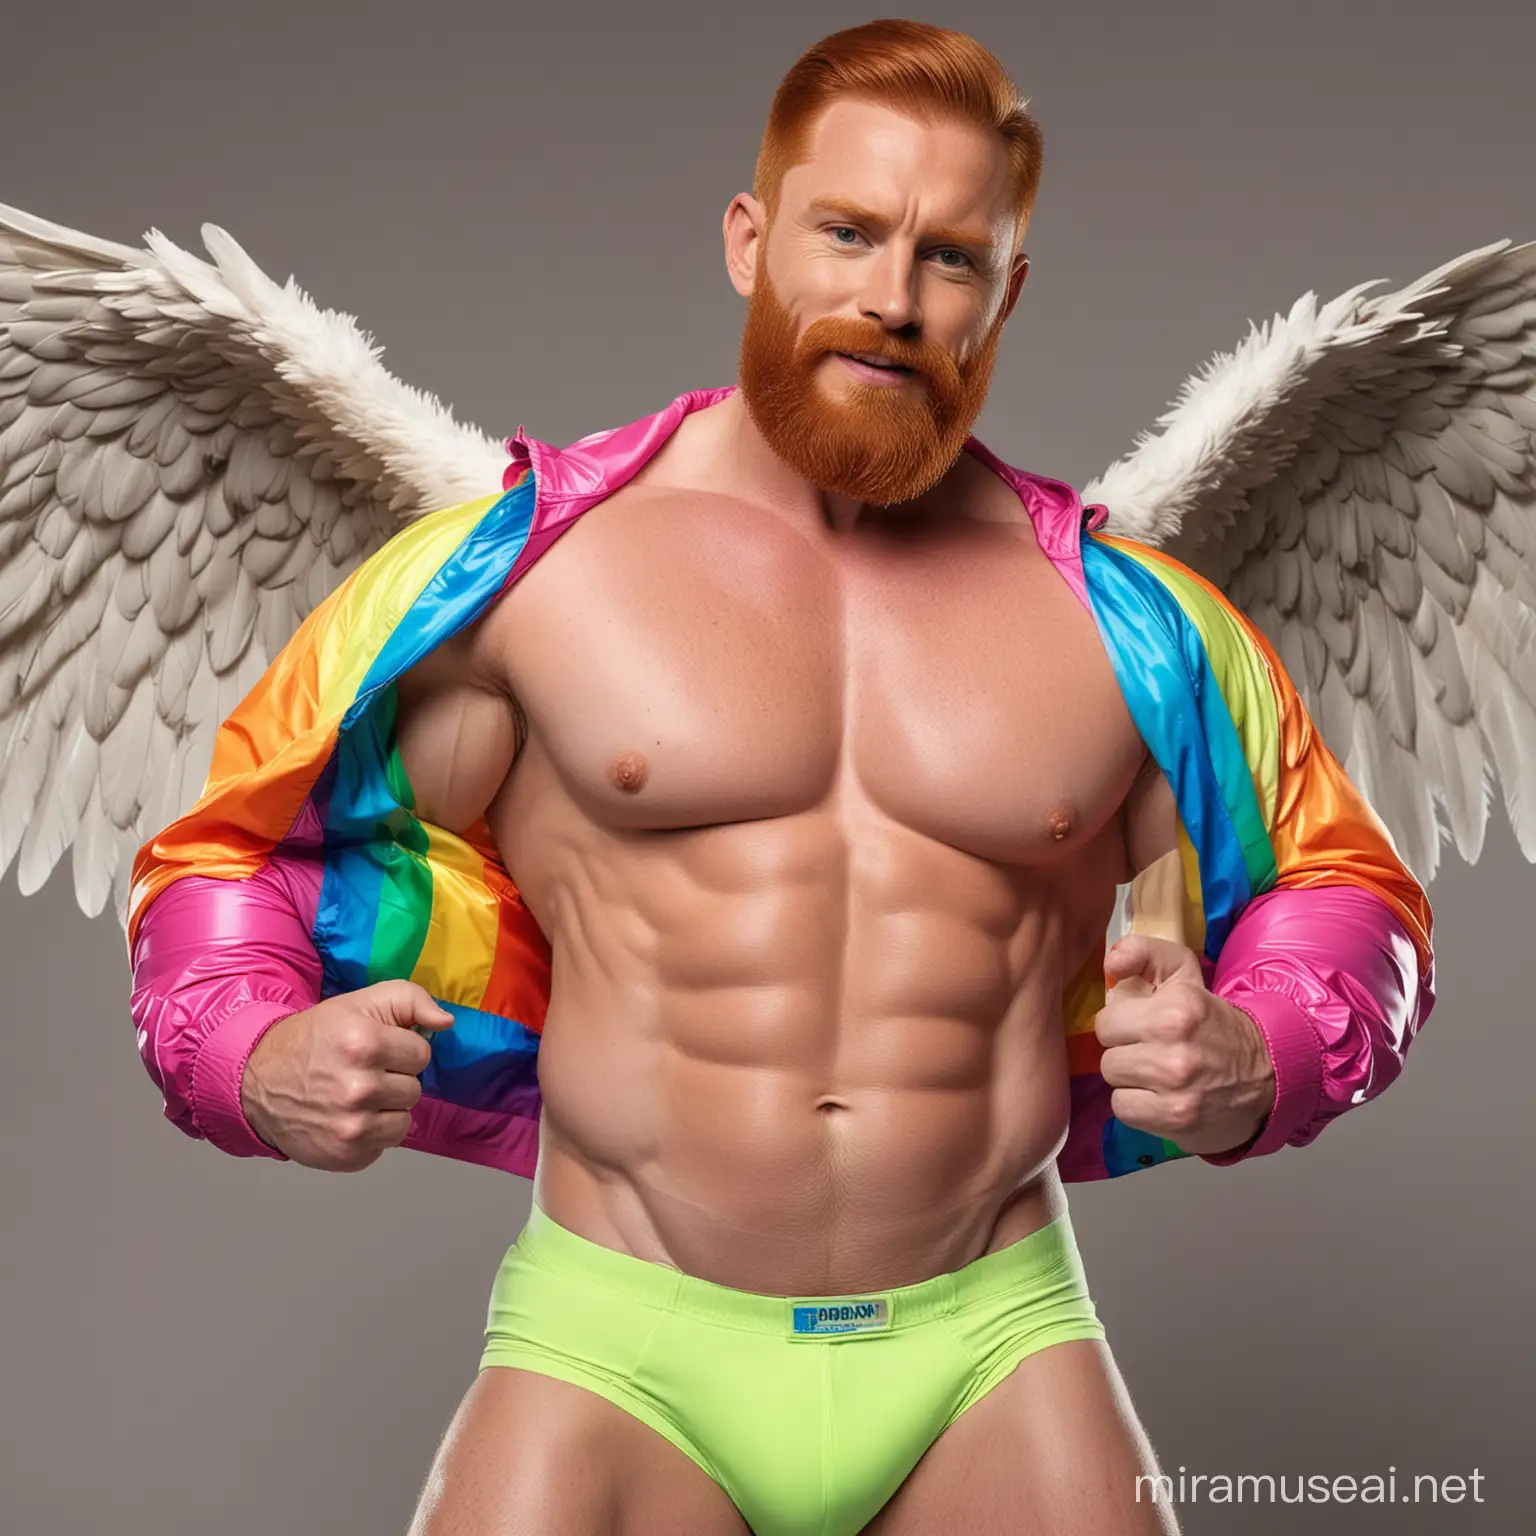 Topless 30s Thick Beefy Redhead IFBB Bodybuilder Beard Daddy wearing Unzipped Multi-Highlighter Bright Rainbow Coloured Jacket with Eagle wings and Flexing Big Strong Arm with doraemon